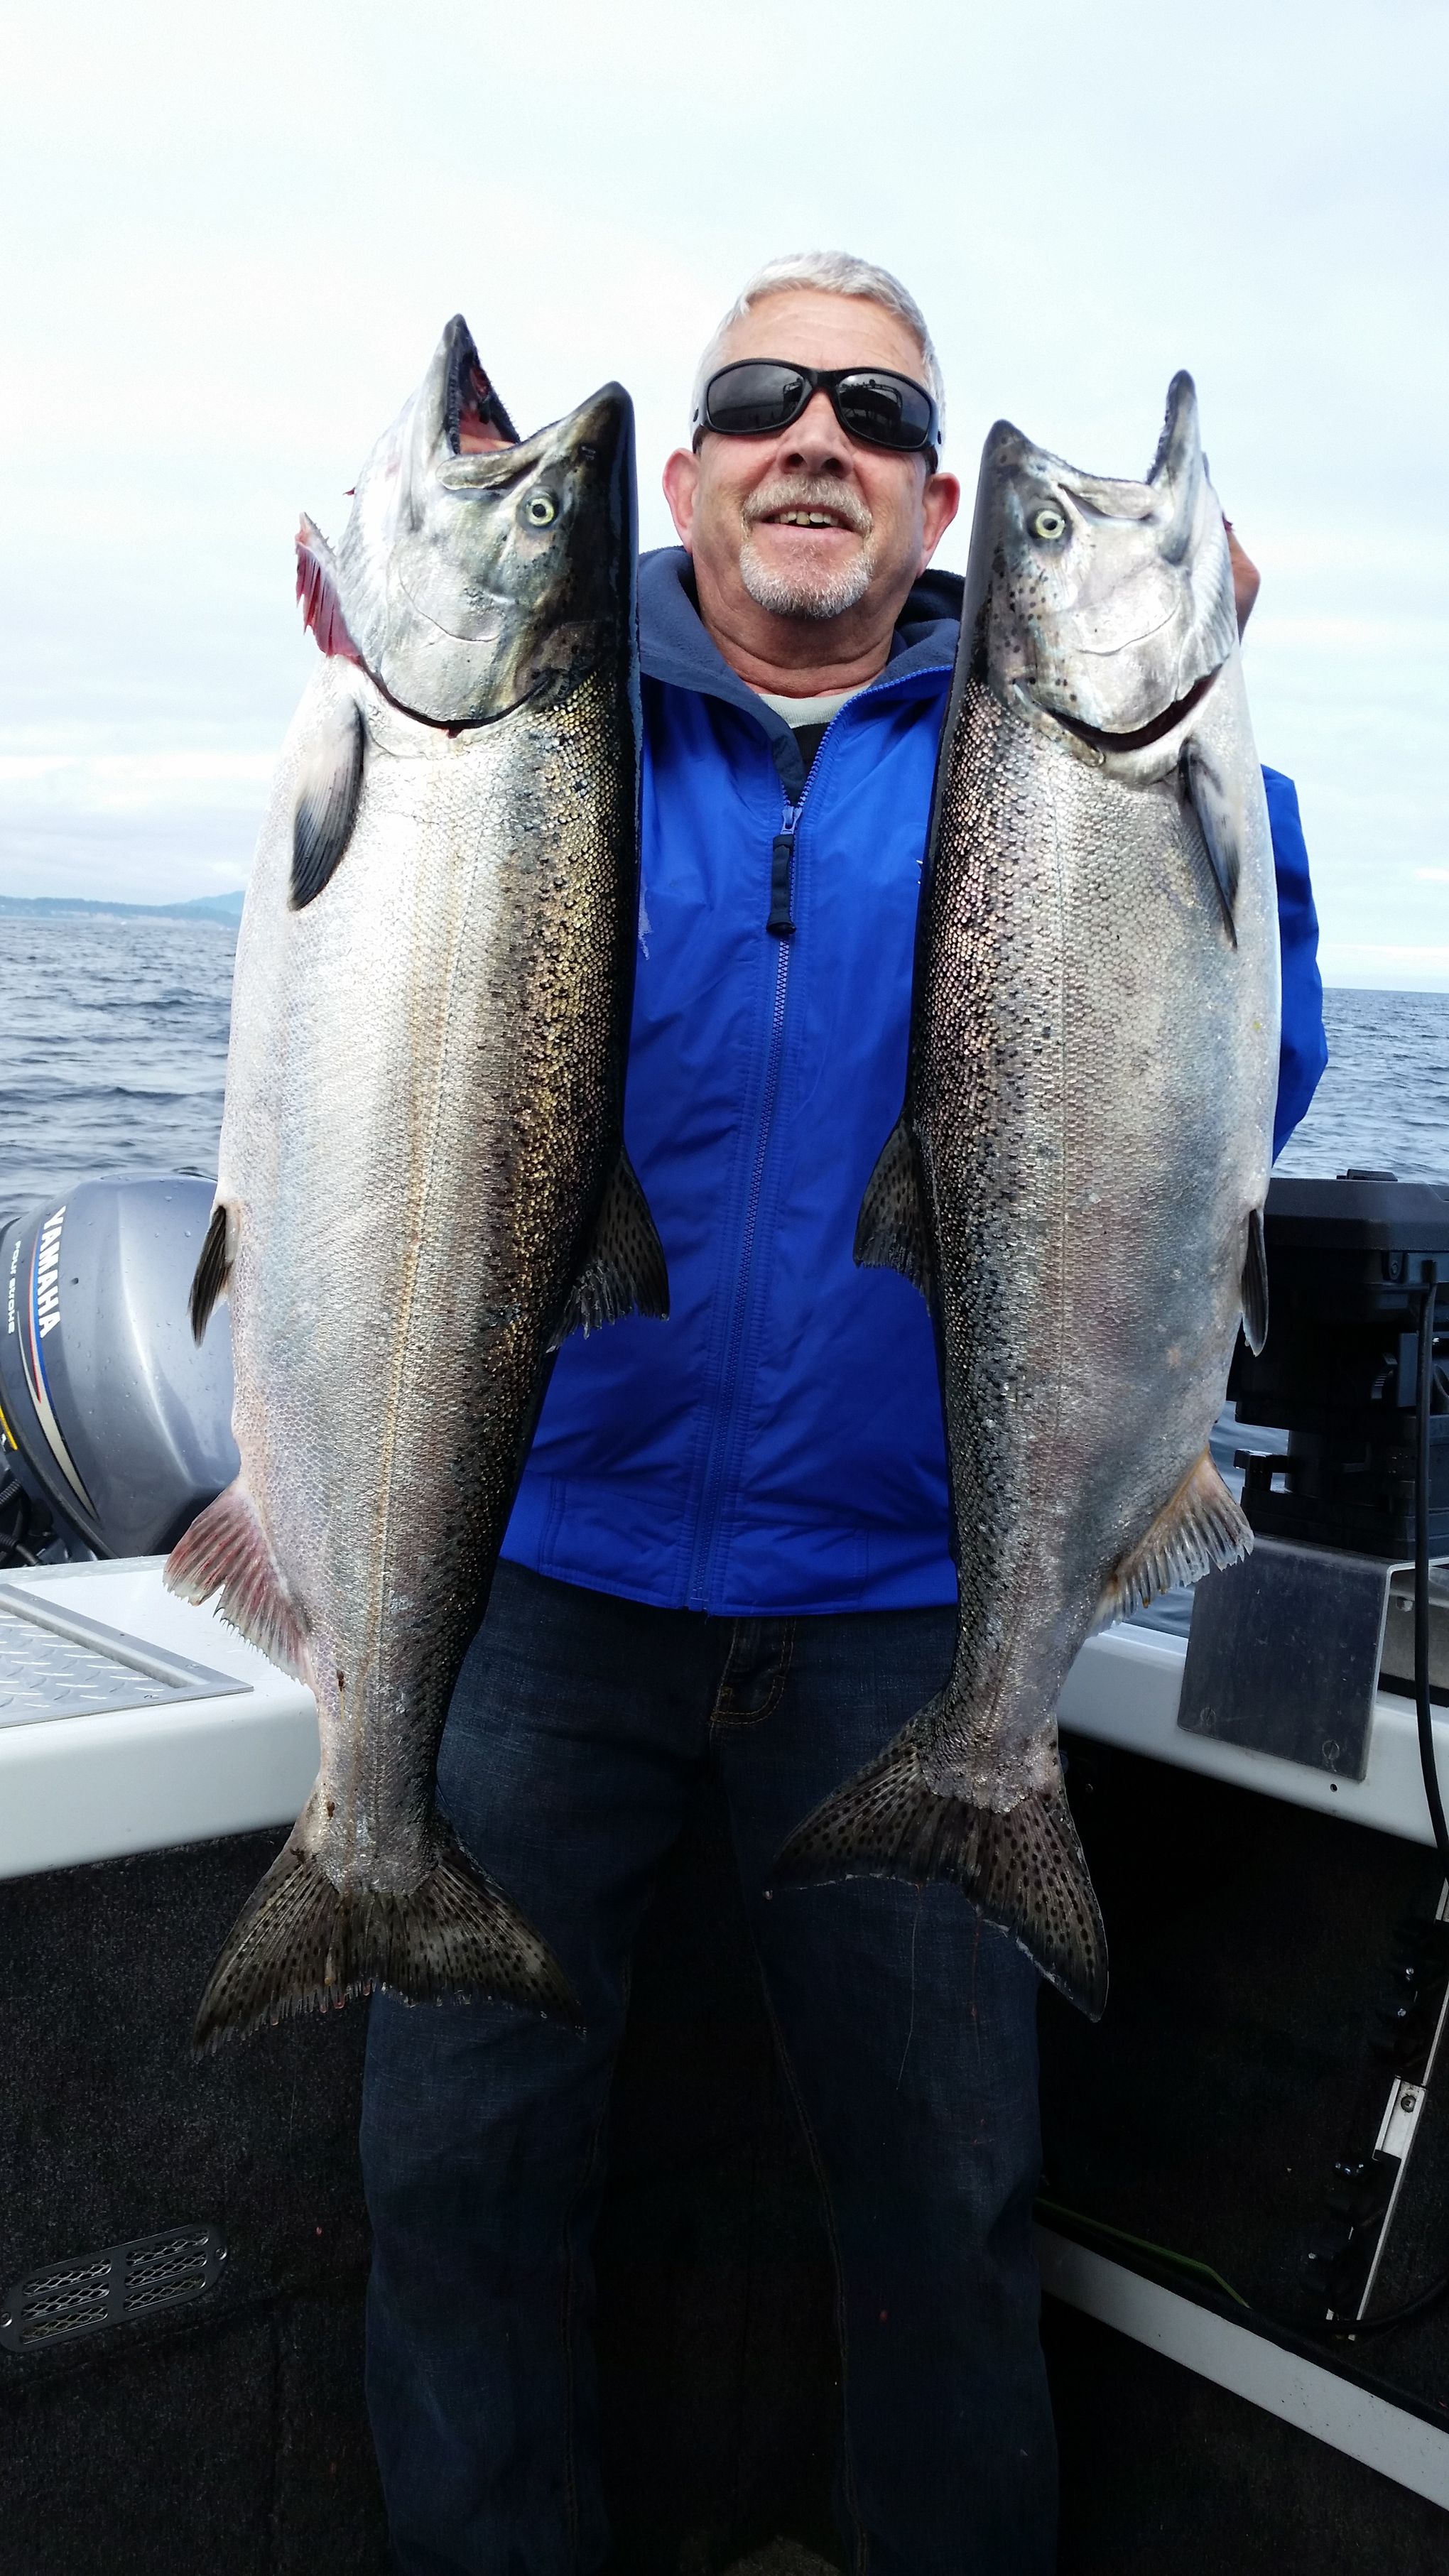 Tony Floor's Tackle Box loaded with plenty of late-summer salmon fishing  choices